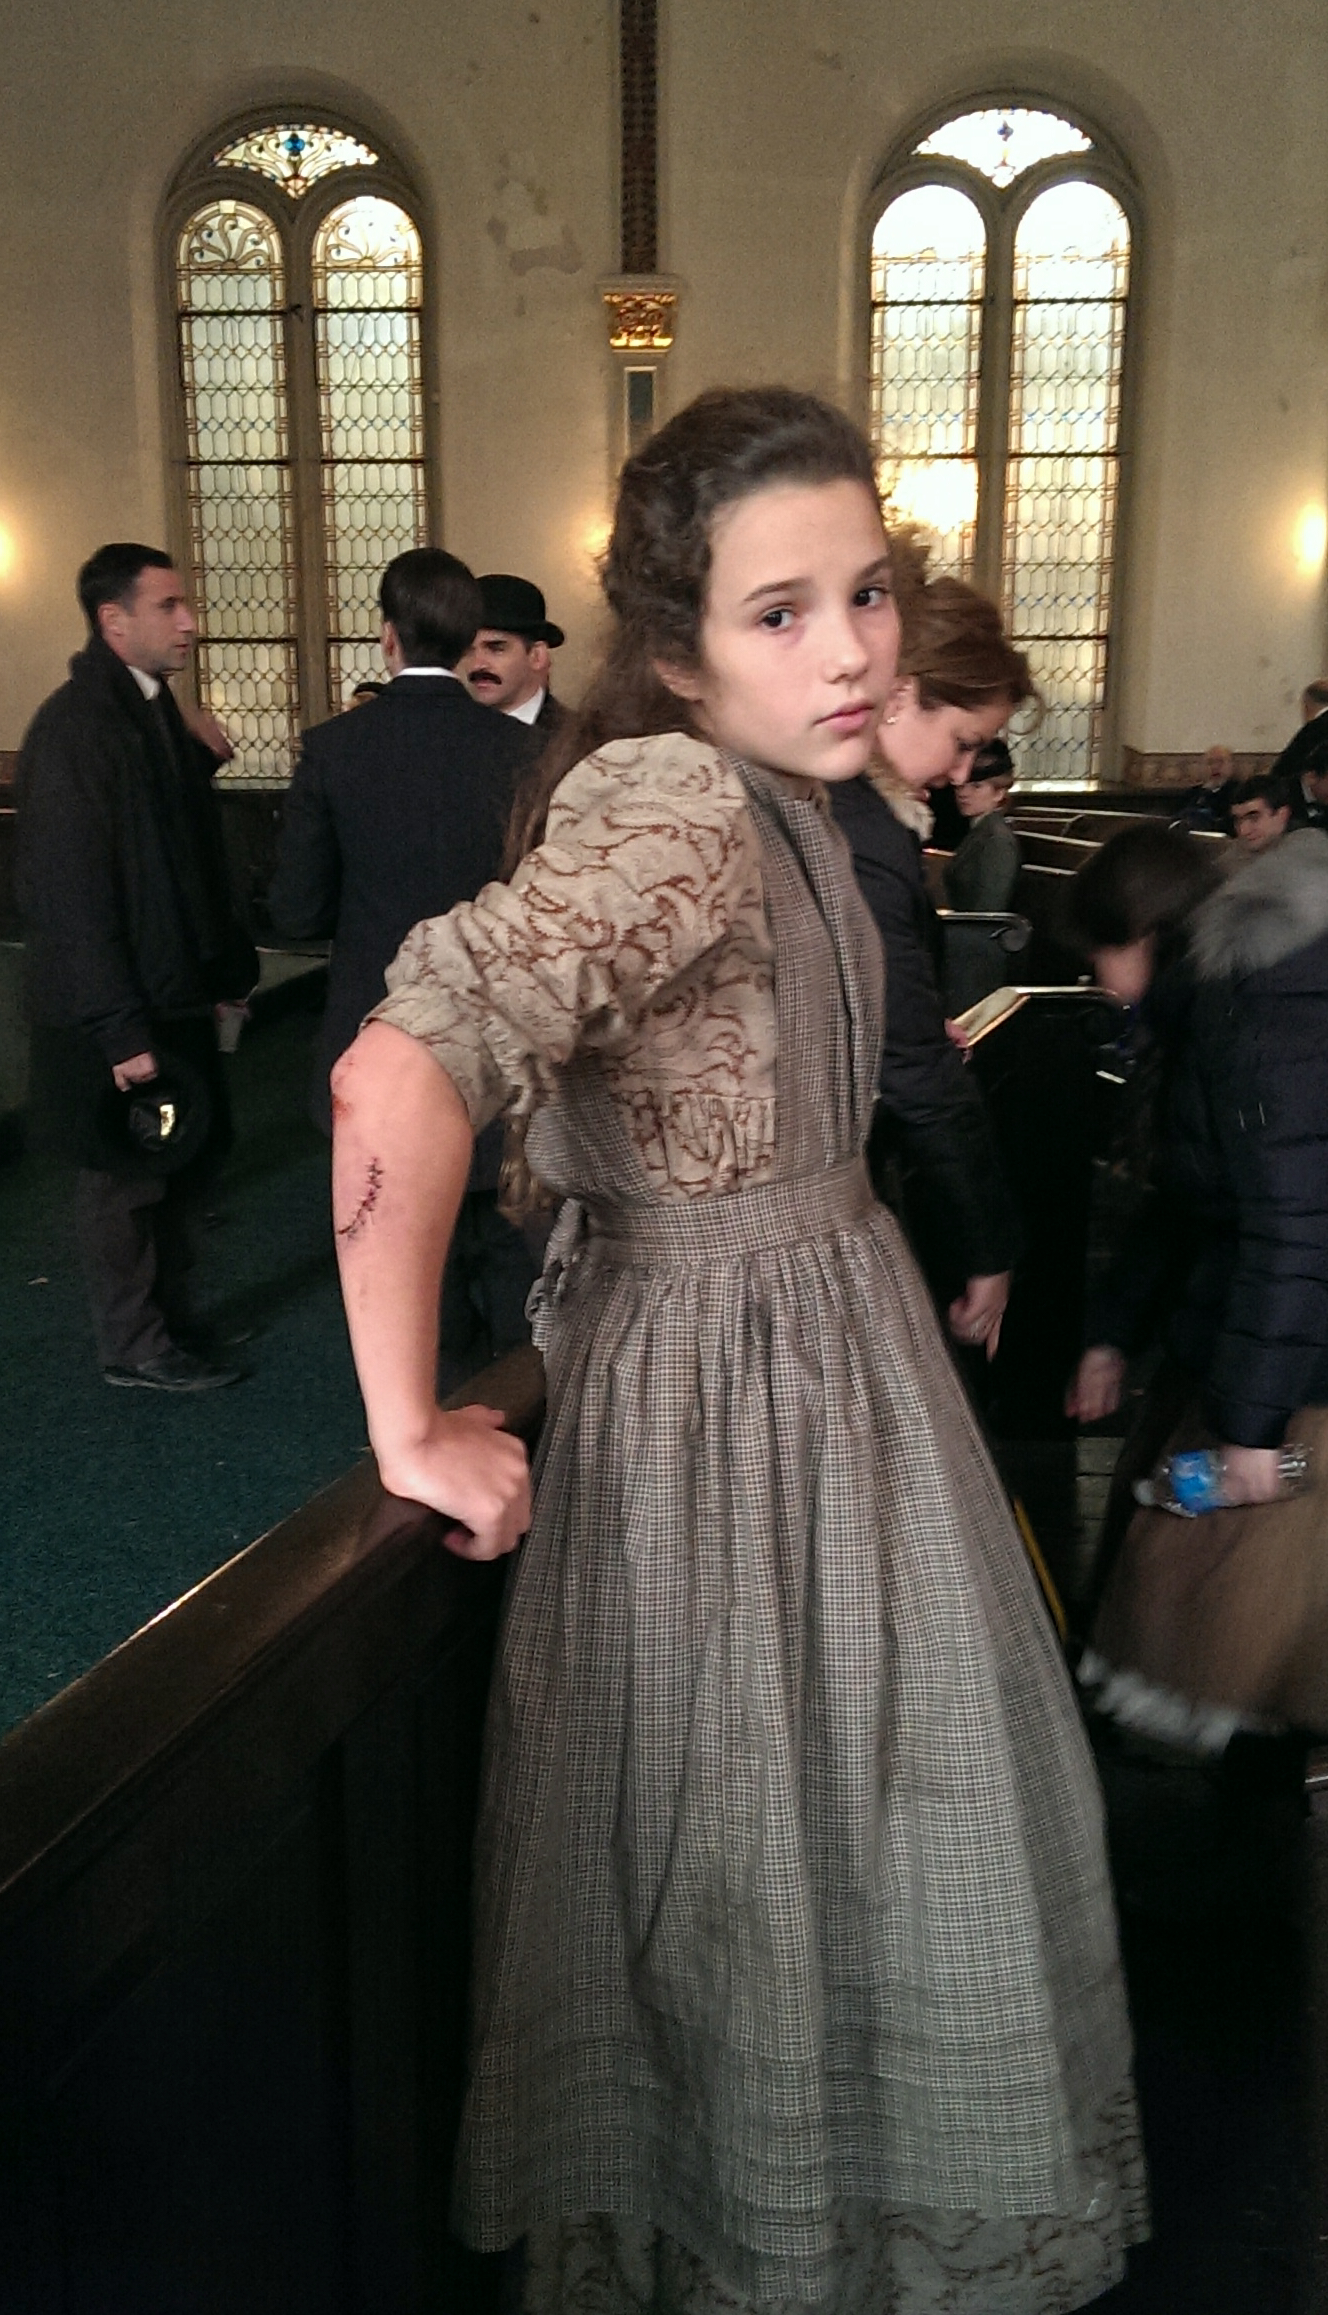 Leila Jean Davis in The Knick, a turn-of-the-century medical drama TV show with Director Steven Soderbergh and actor Andre Holland as her surgeon Dr. Edwards.